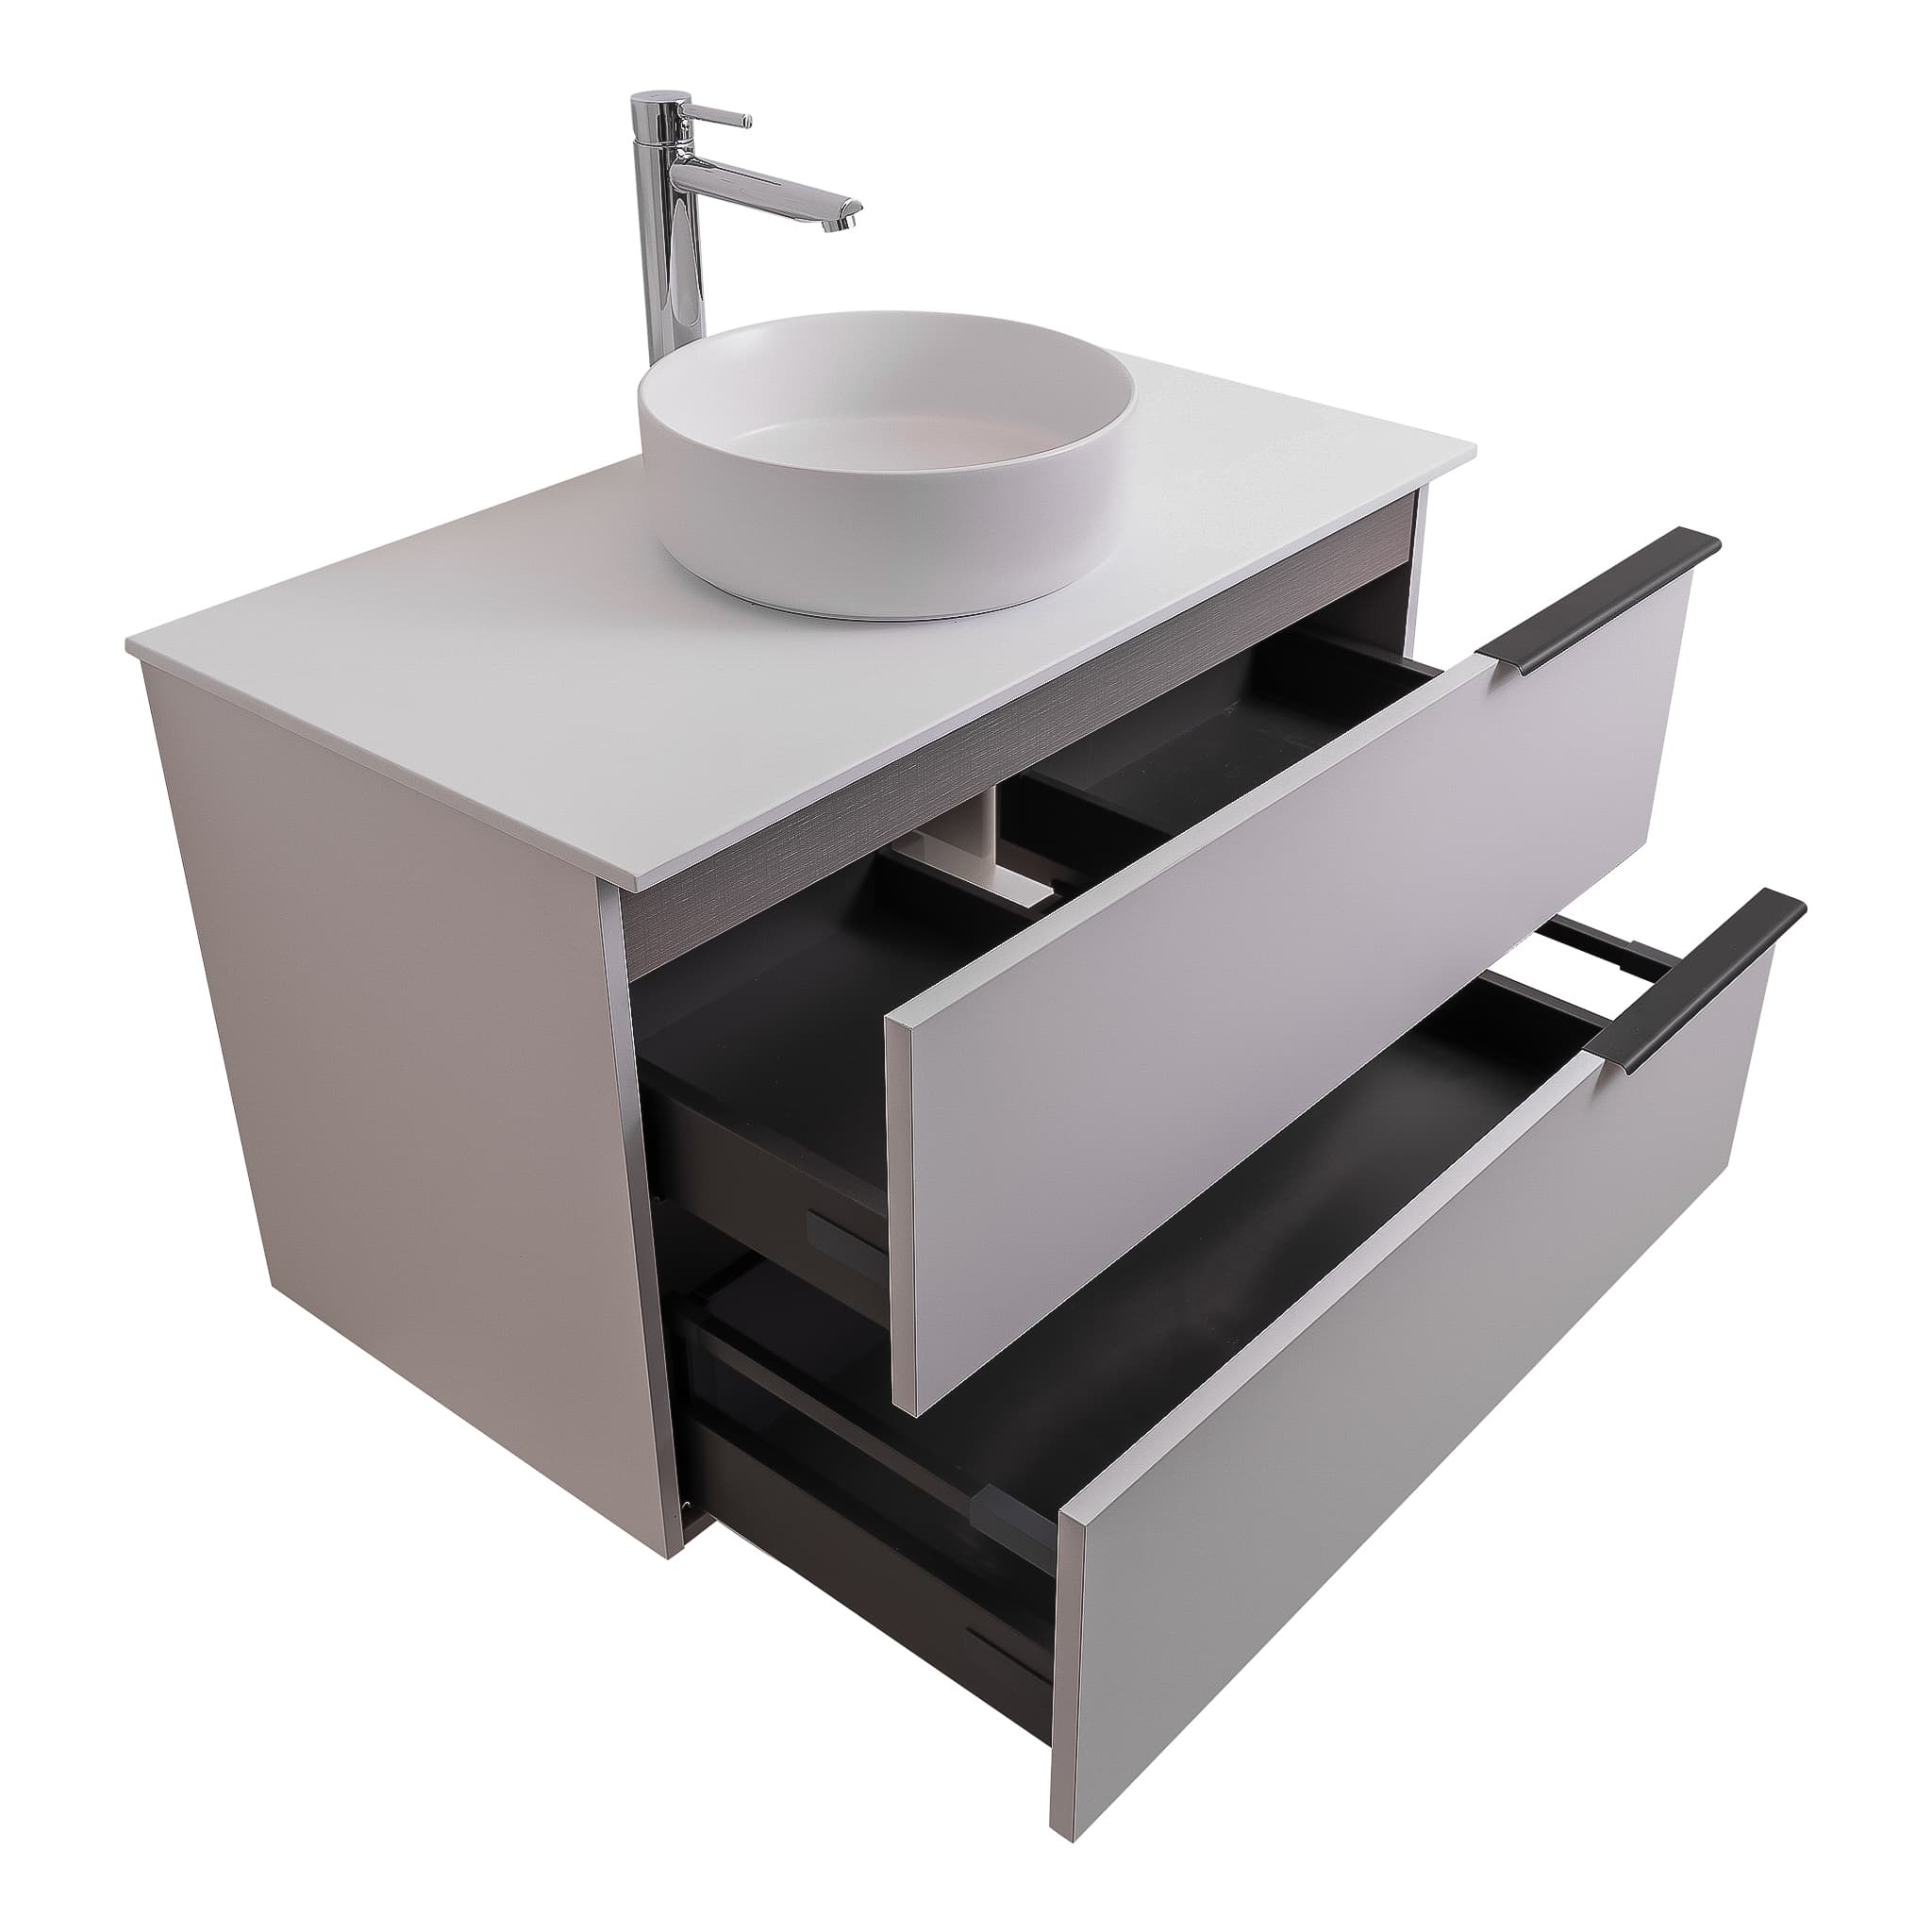 Mallorca 35.5 Matte White Cabinet, Ares White Top And Ares White Ceramic Basin, Wall Mounted Modern Vanity Set